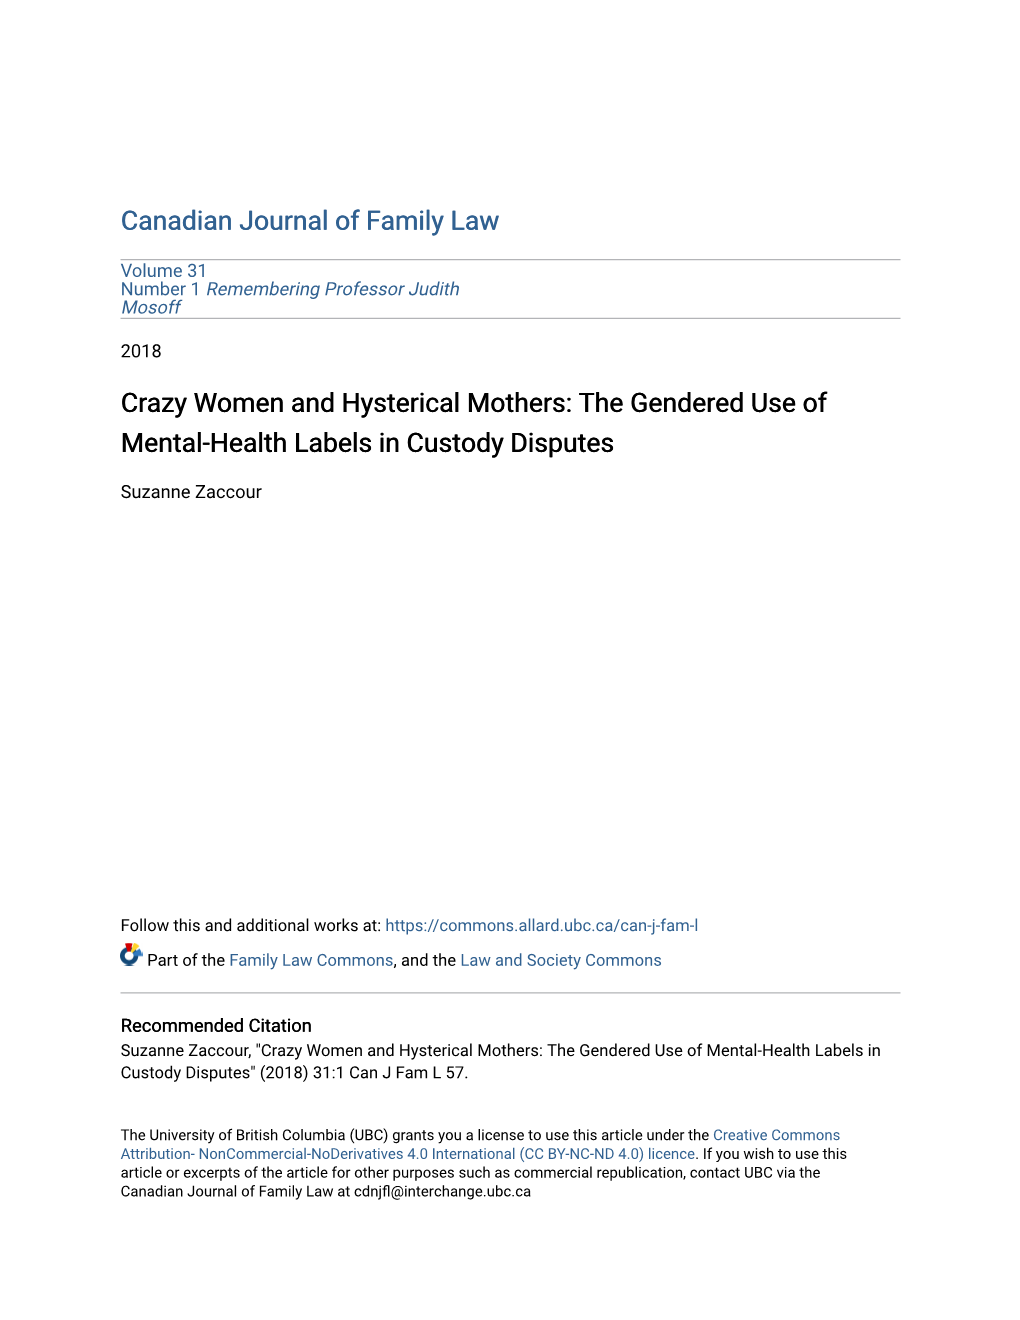 Crazy Women and Hysterical Mothers: the Gendered Use of Mental-Health Labels in Custody Disputes